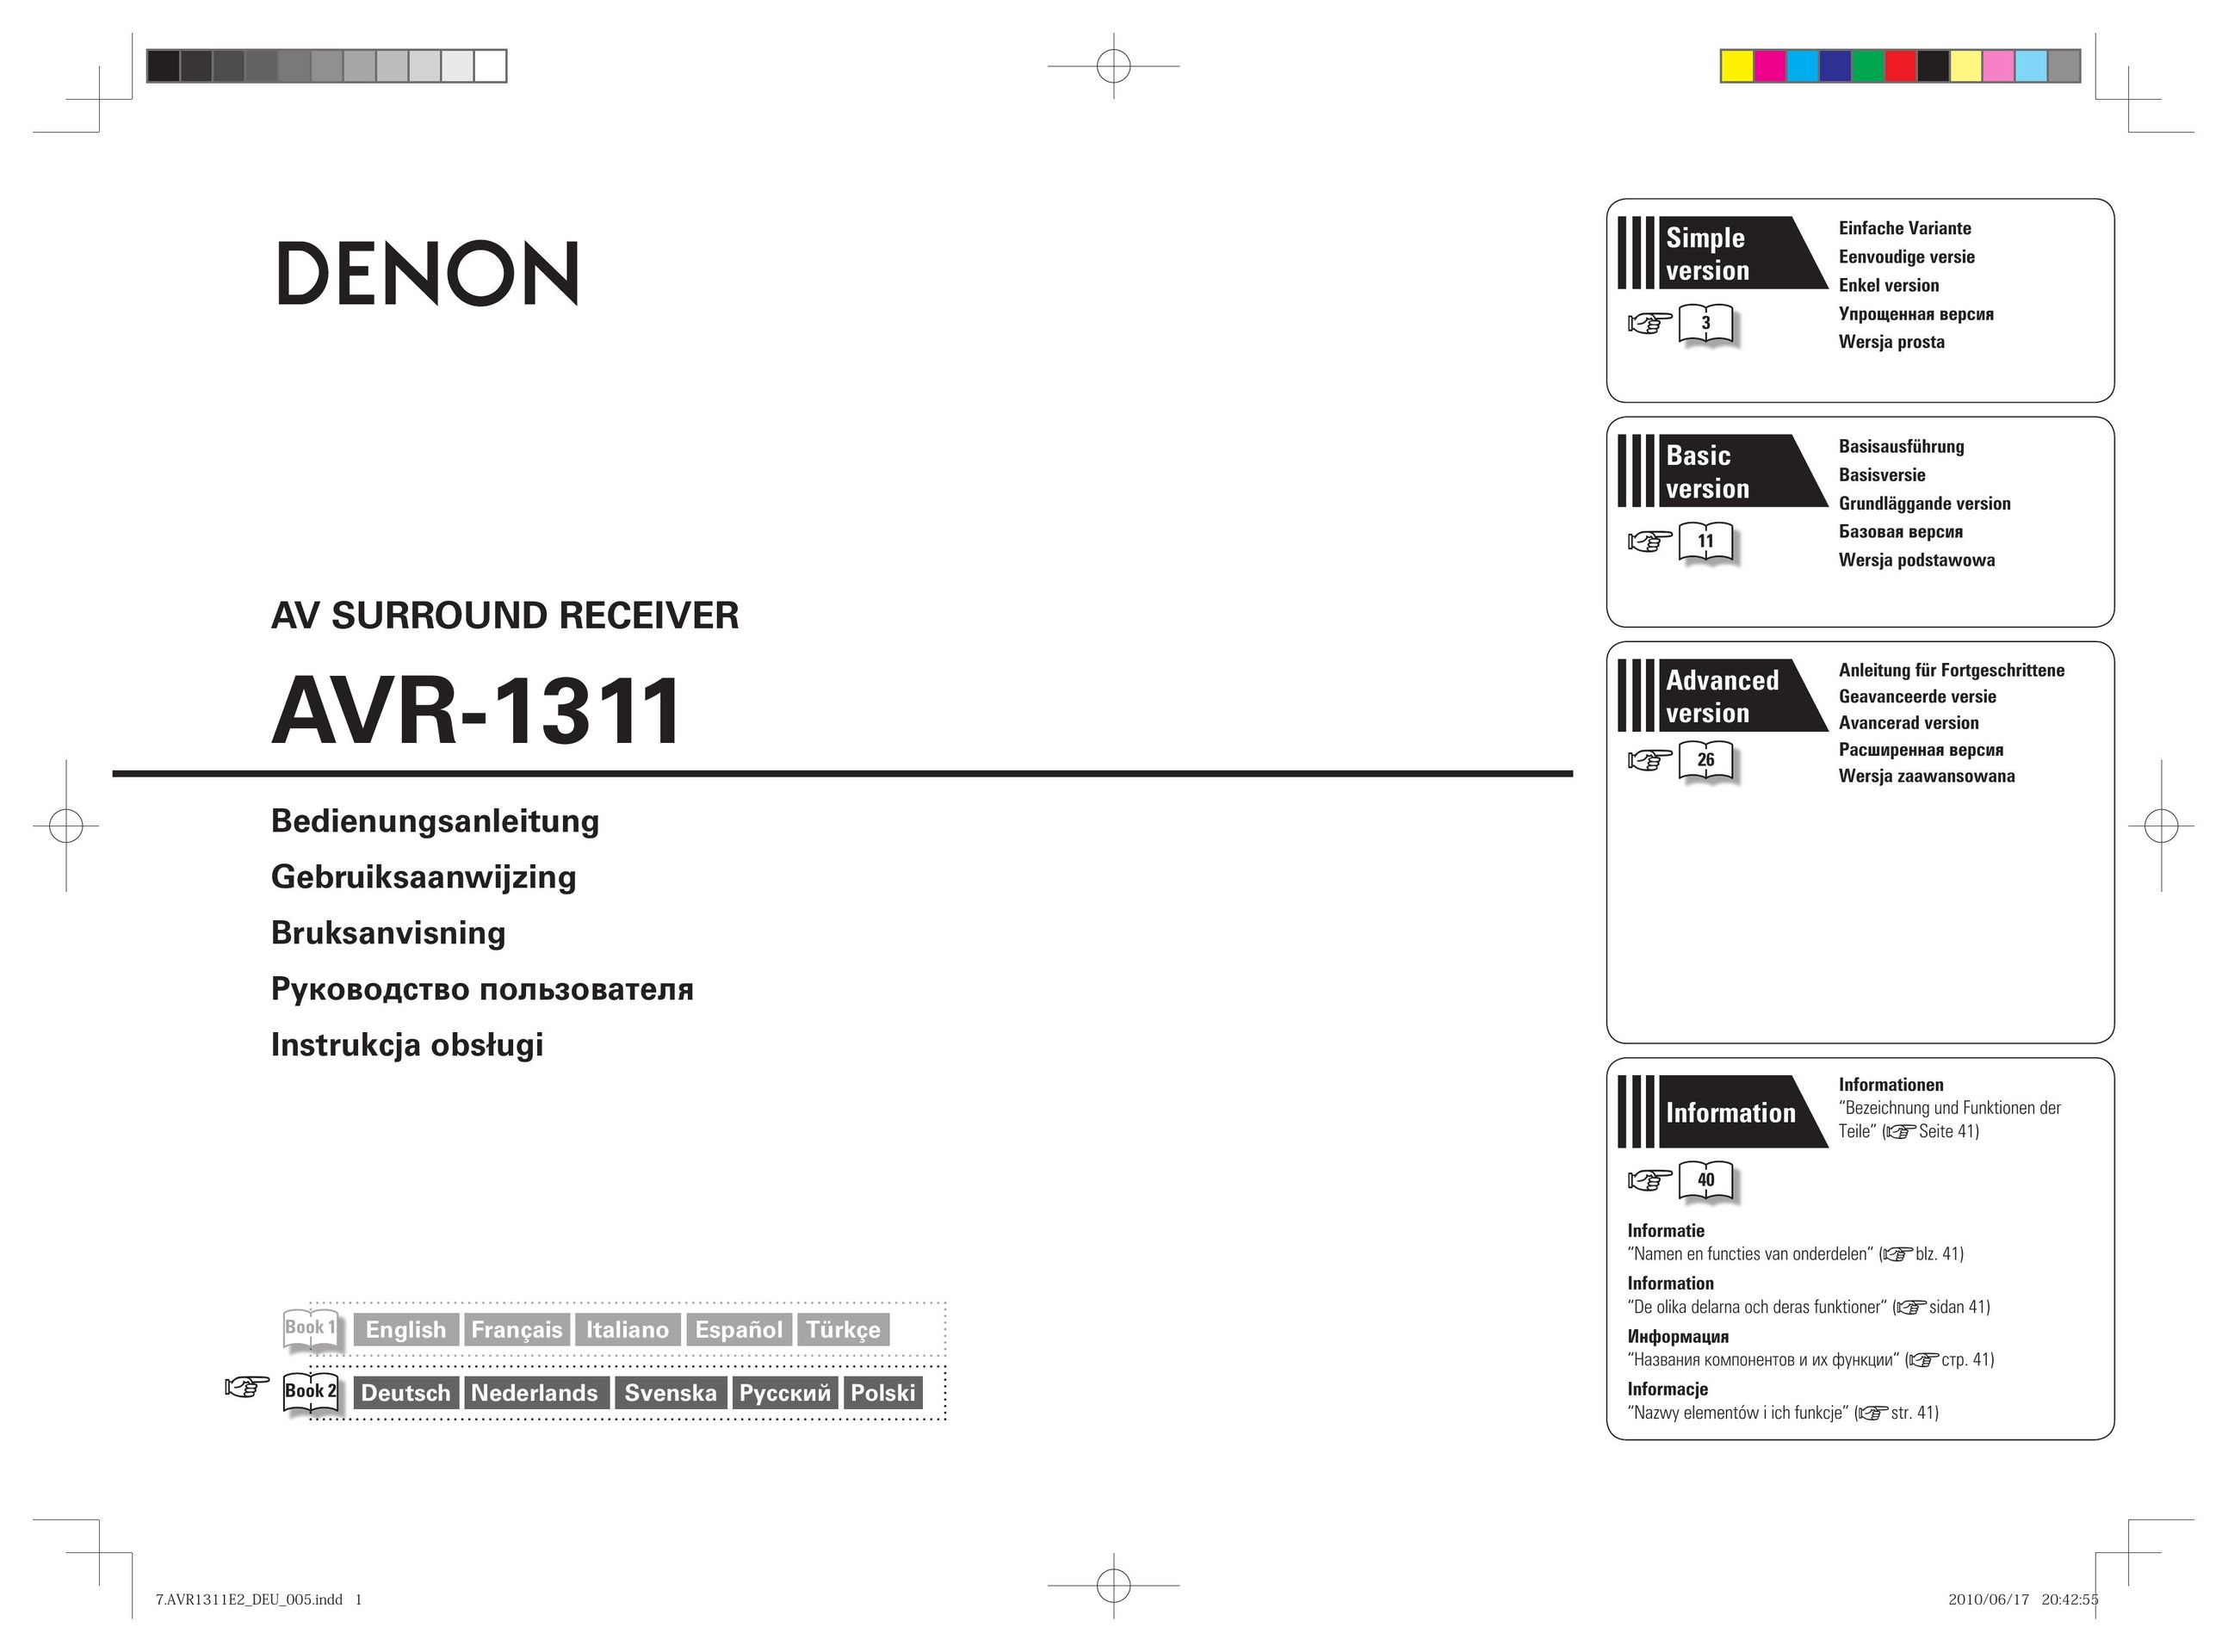 Denon AVR-1311 Home Theater System User Manual